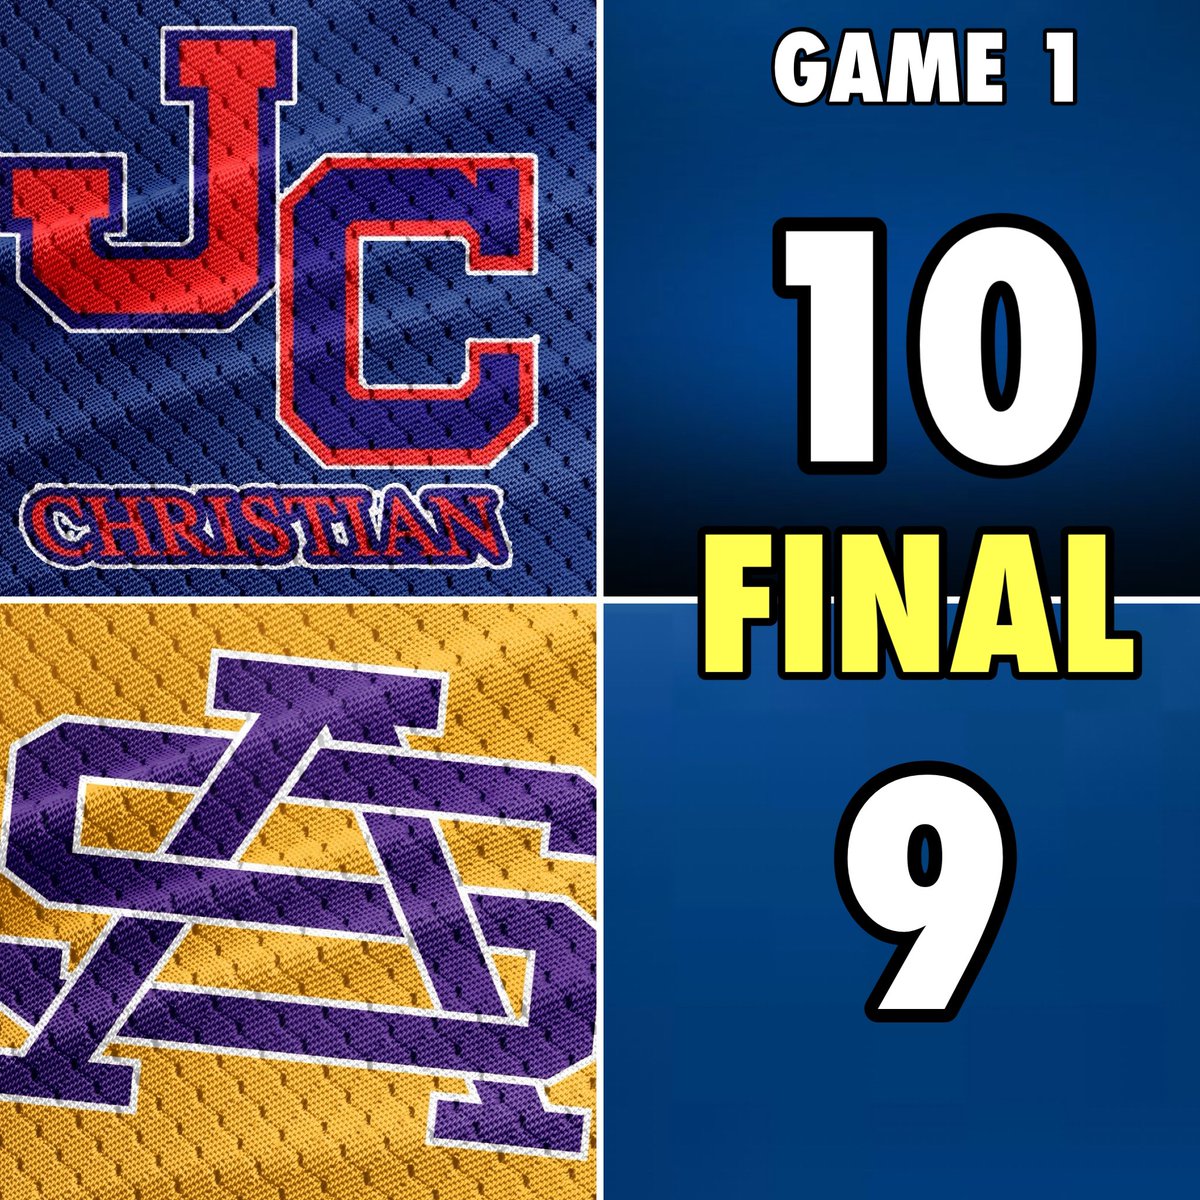 John Curtis jumped out to a 10-1 lead and had to hold on as St. Aug made a late inning rally. The Patriots take Game 1.